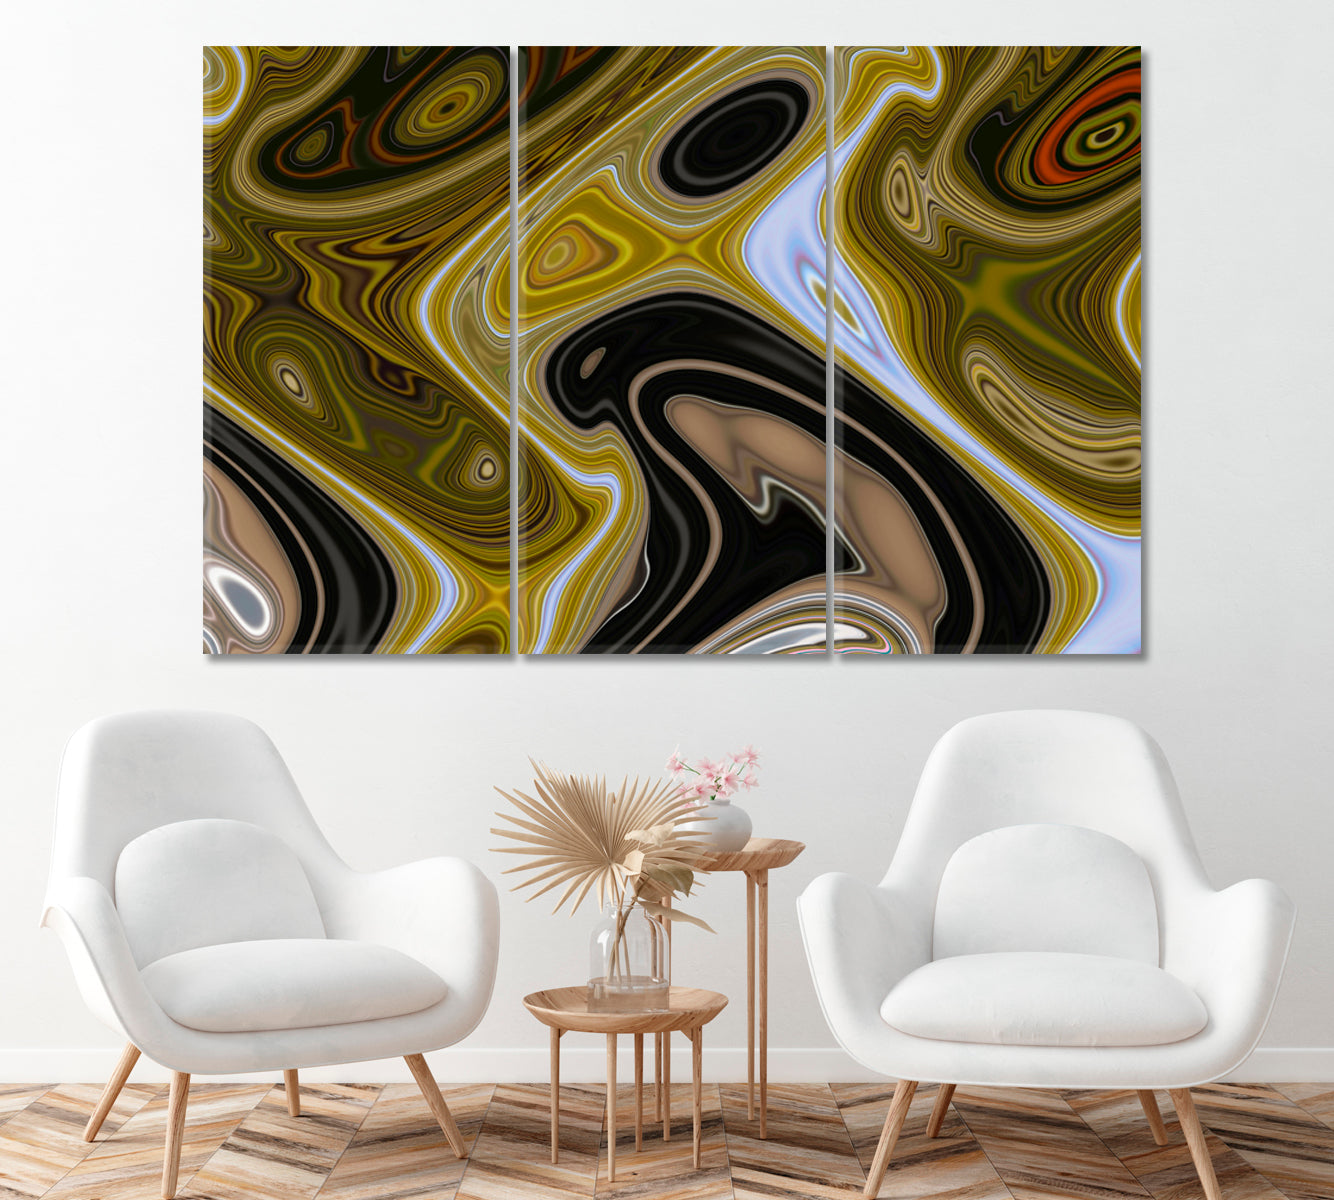 Abstract Psychedelic Swirl Pattern Canvas Print ArtLexy 3 Panels 36"x24" inches 